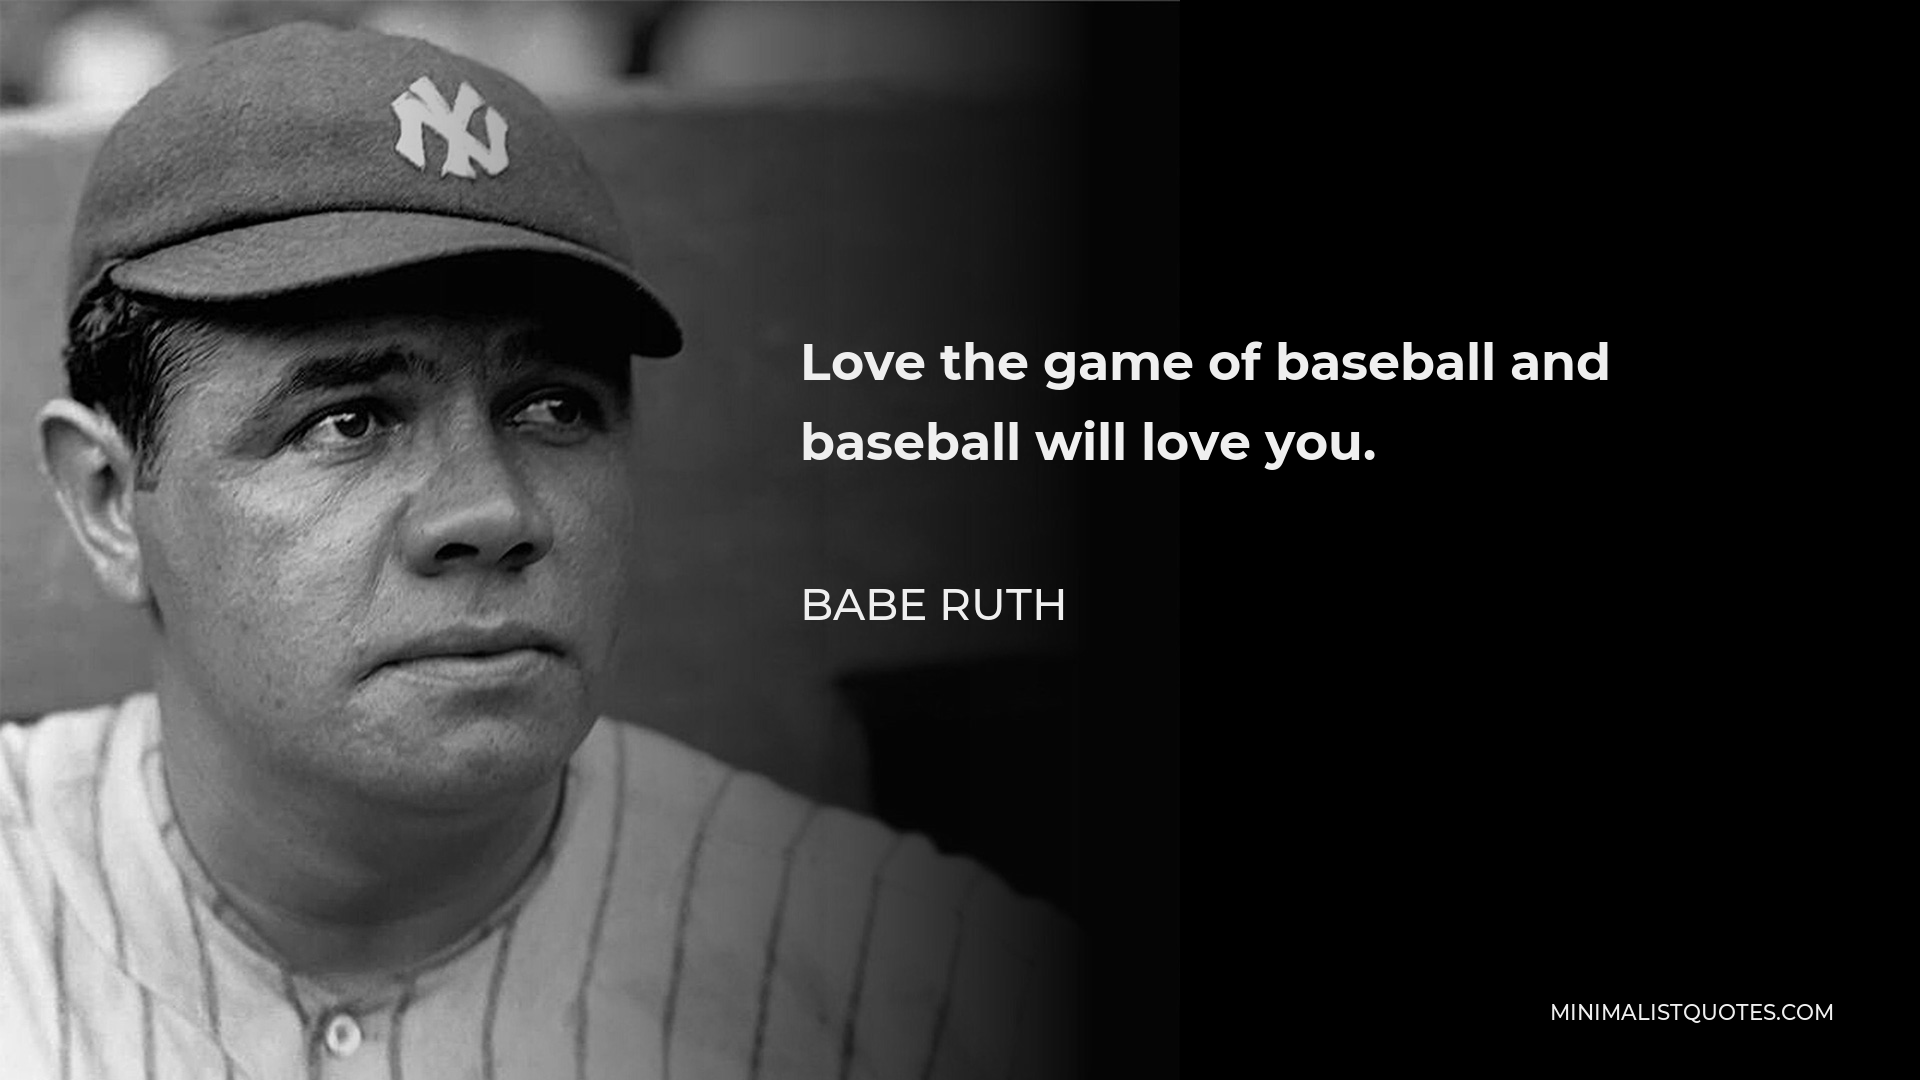 Babe Ruth Quote - Love the game of baseball and baseball will love you.